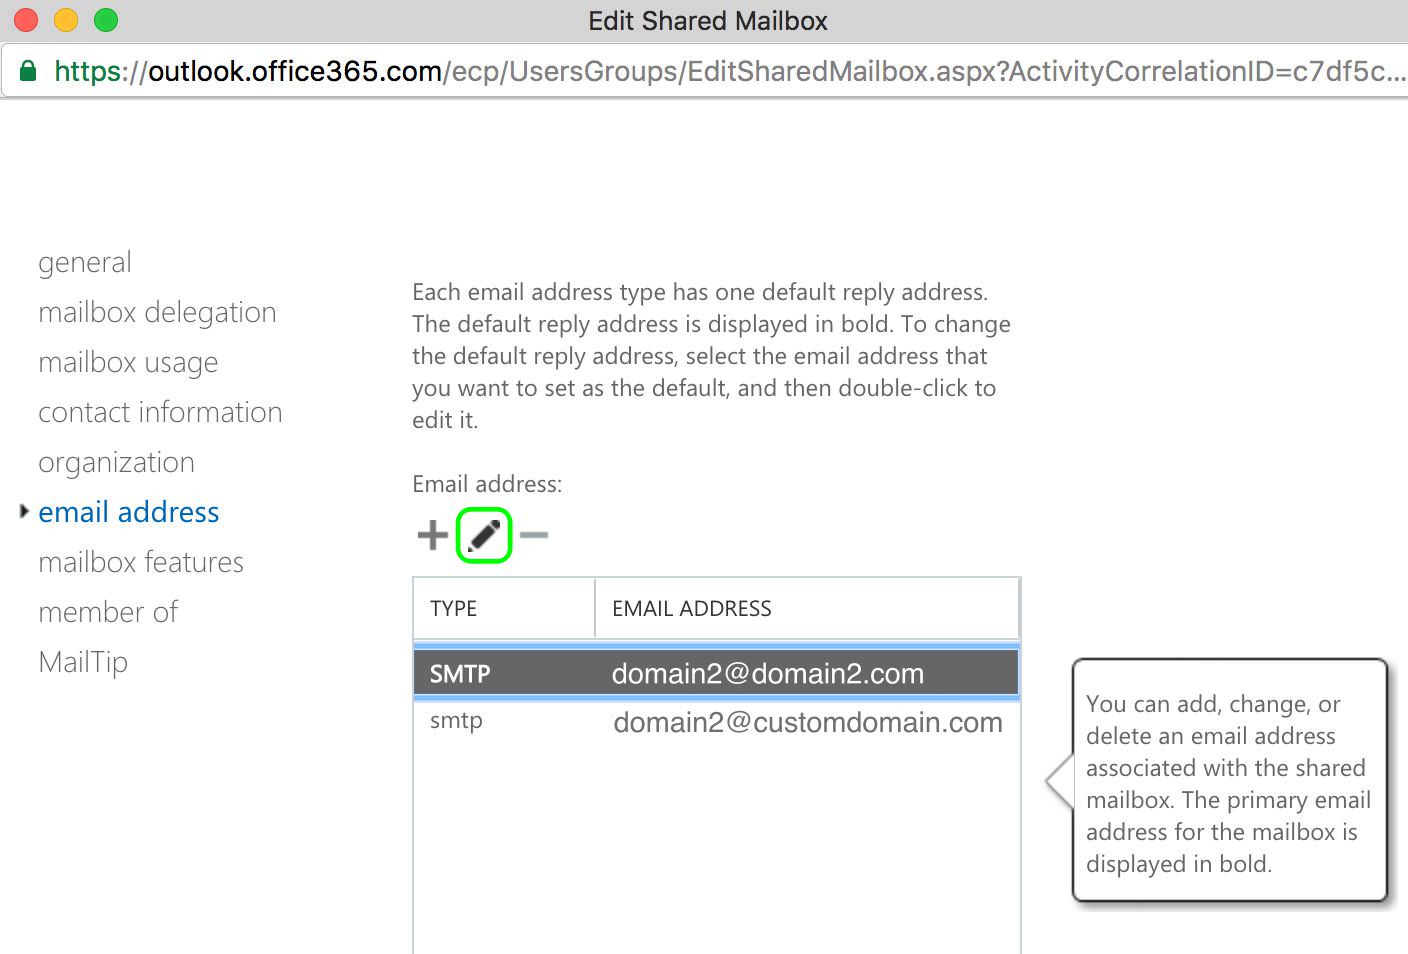 9.3 Ensure that domain2@domain2.com email is highlighted and Click the pencil icon to edit